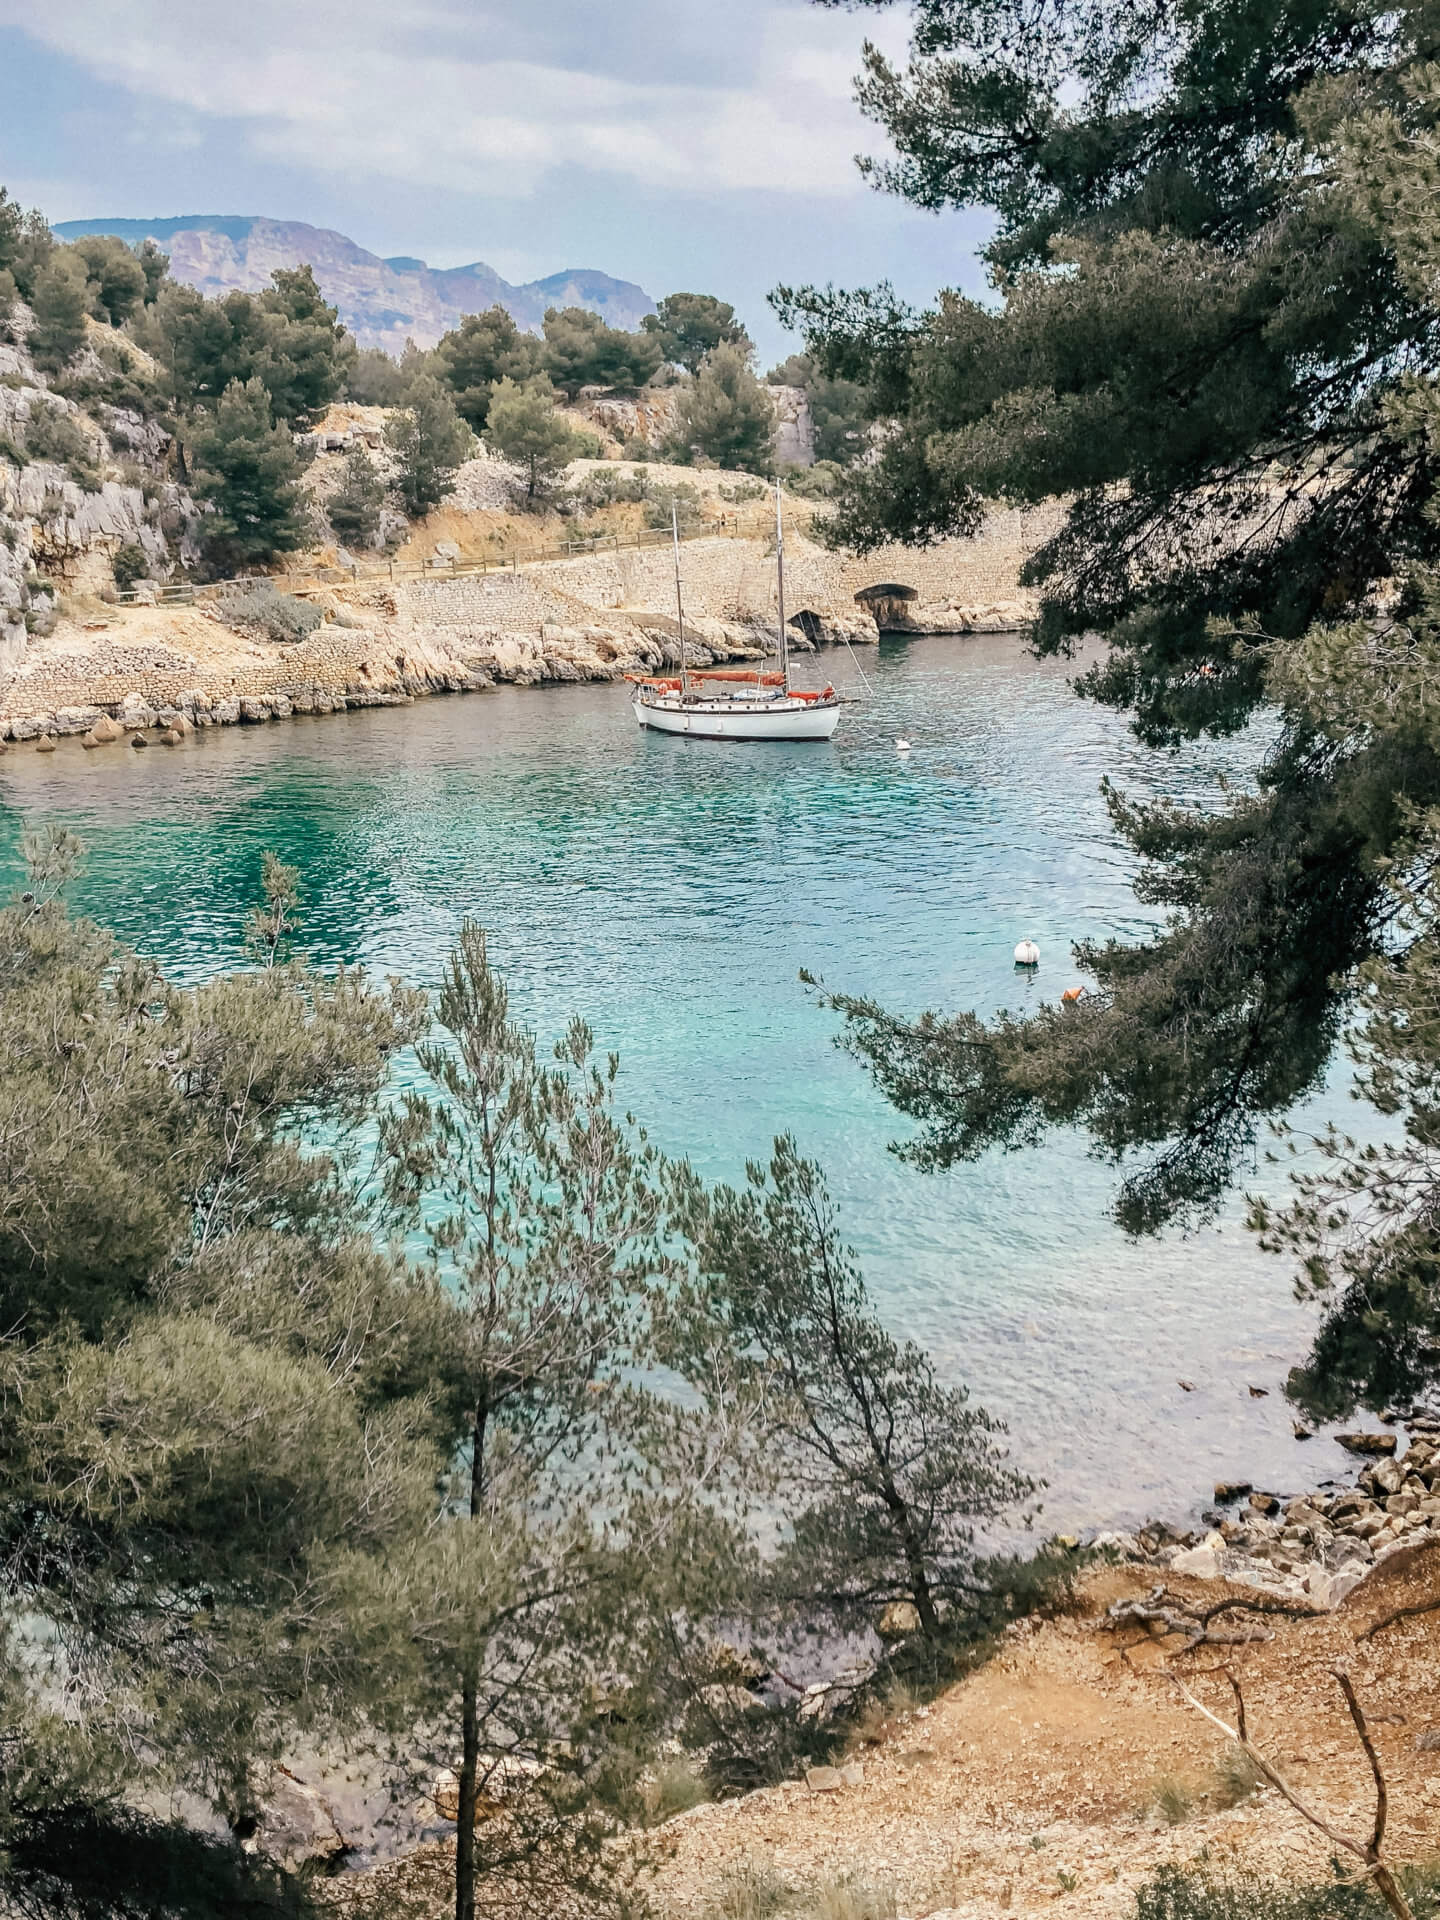 Visiting the Beautiful Beaches of Calanques National Park in Cassis France